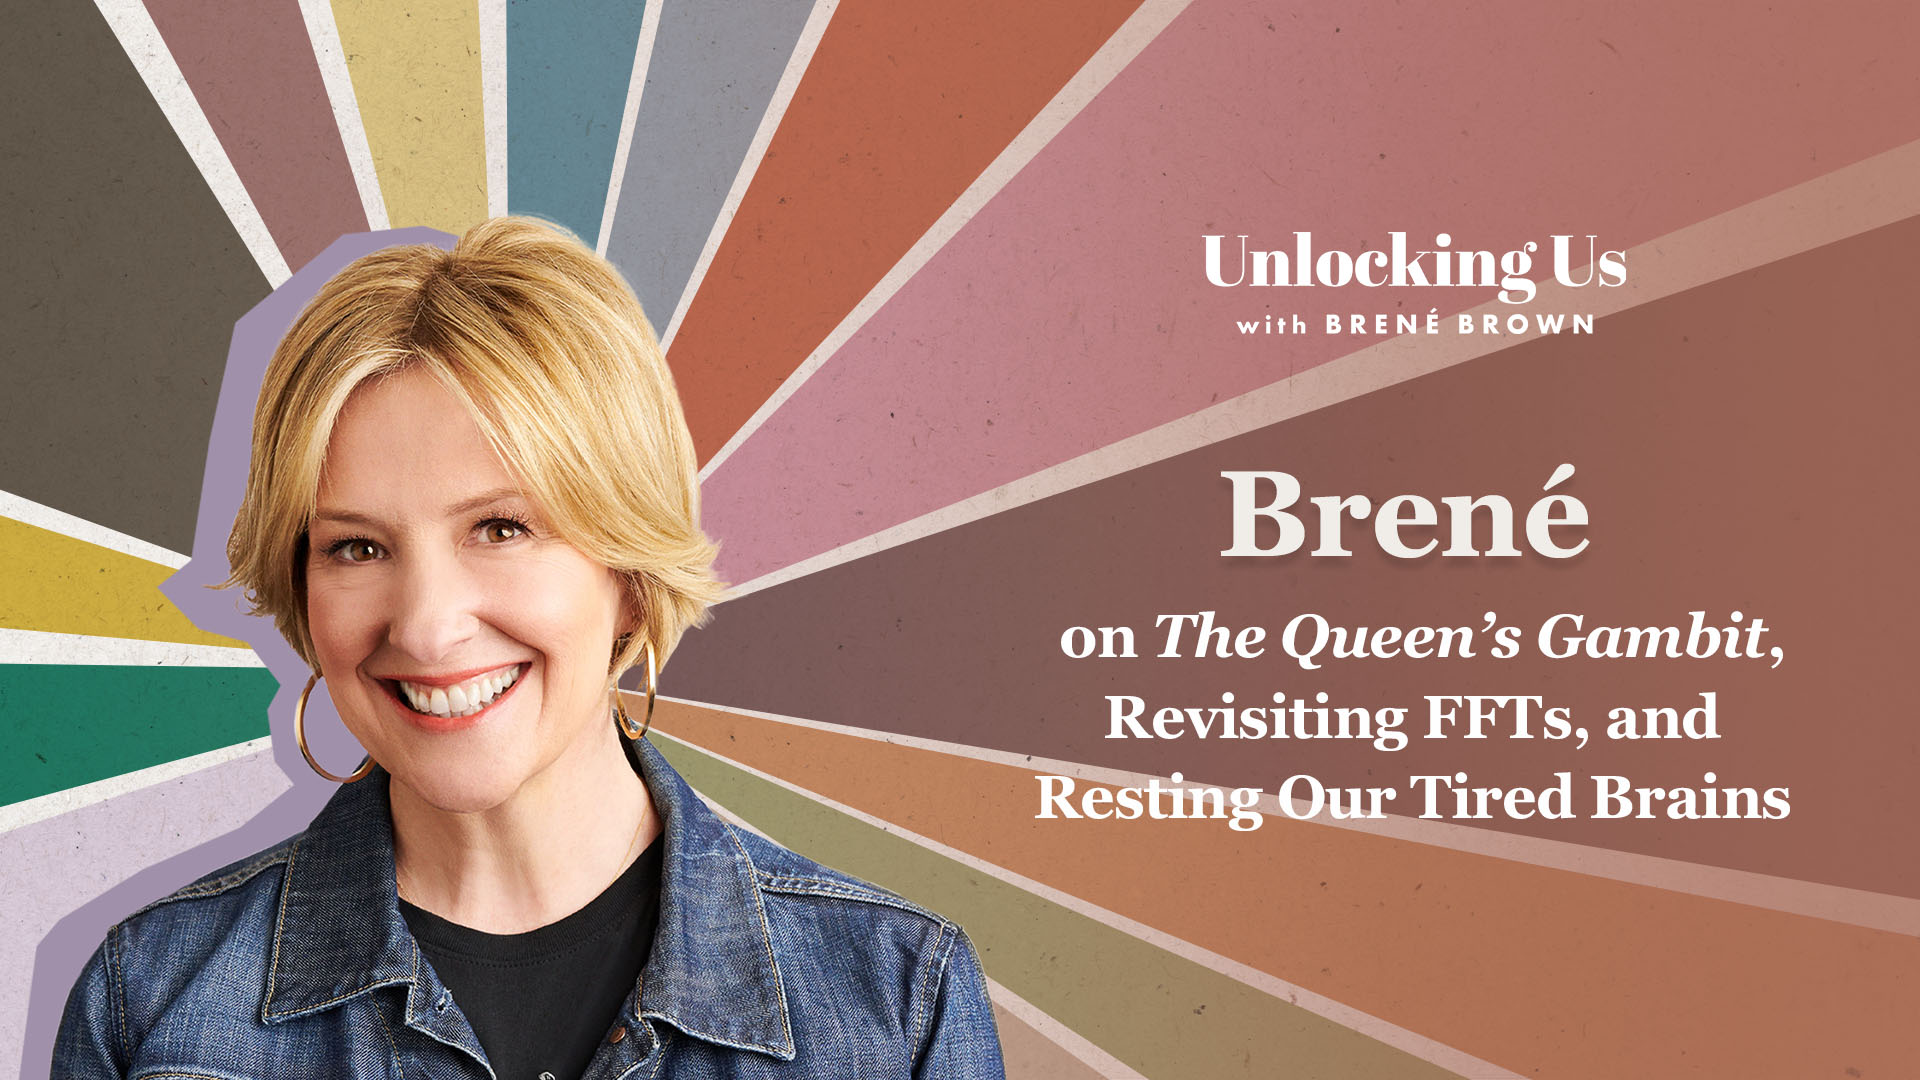 SPWDesigns & Media - History is the study of ✨surprise✨ - Edward T.  O'Donnell So I listening to Brené Brown's Unlocking Us episode: The  Queen's Gambit, Revisiting FFT's, and Resting Our Tired